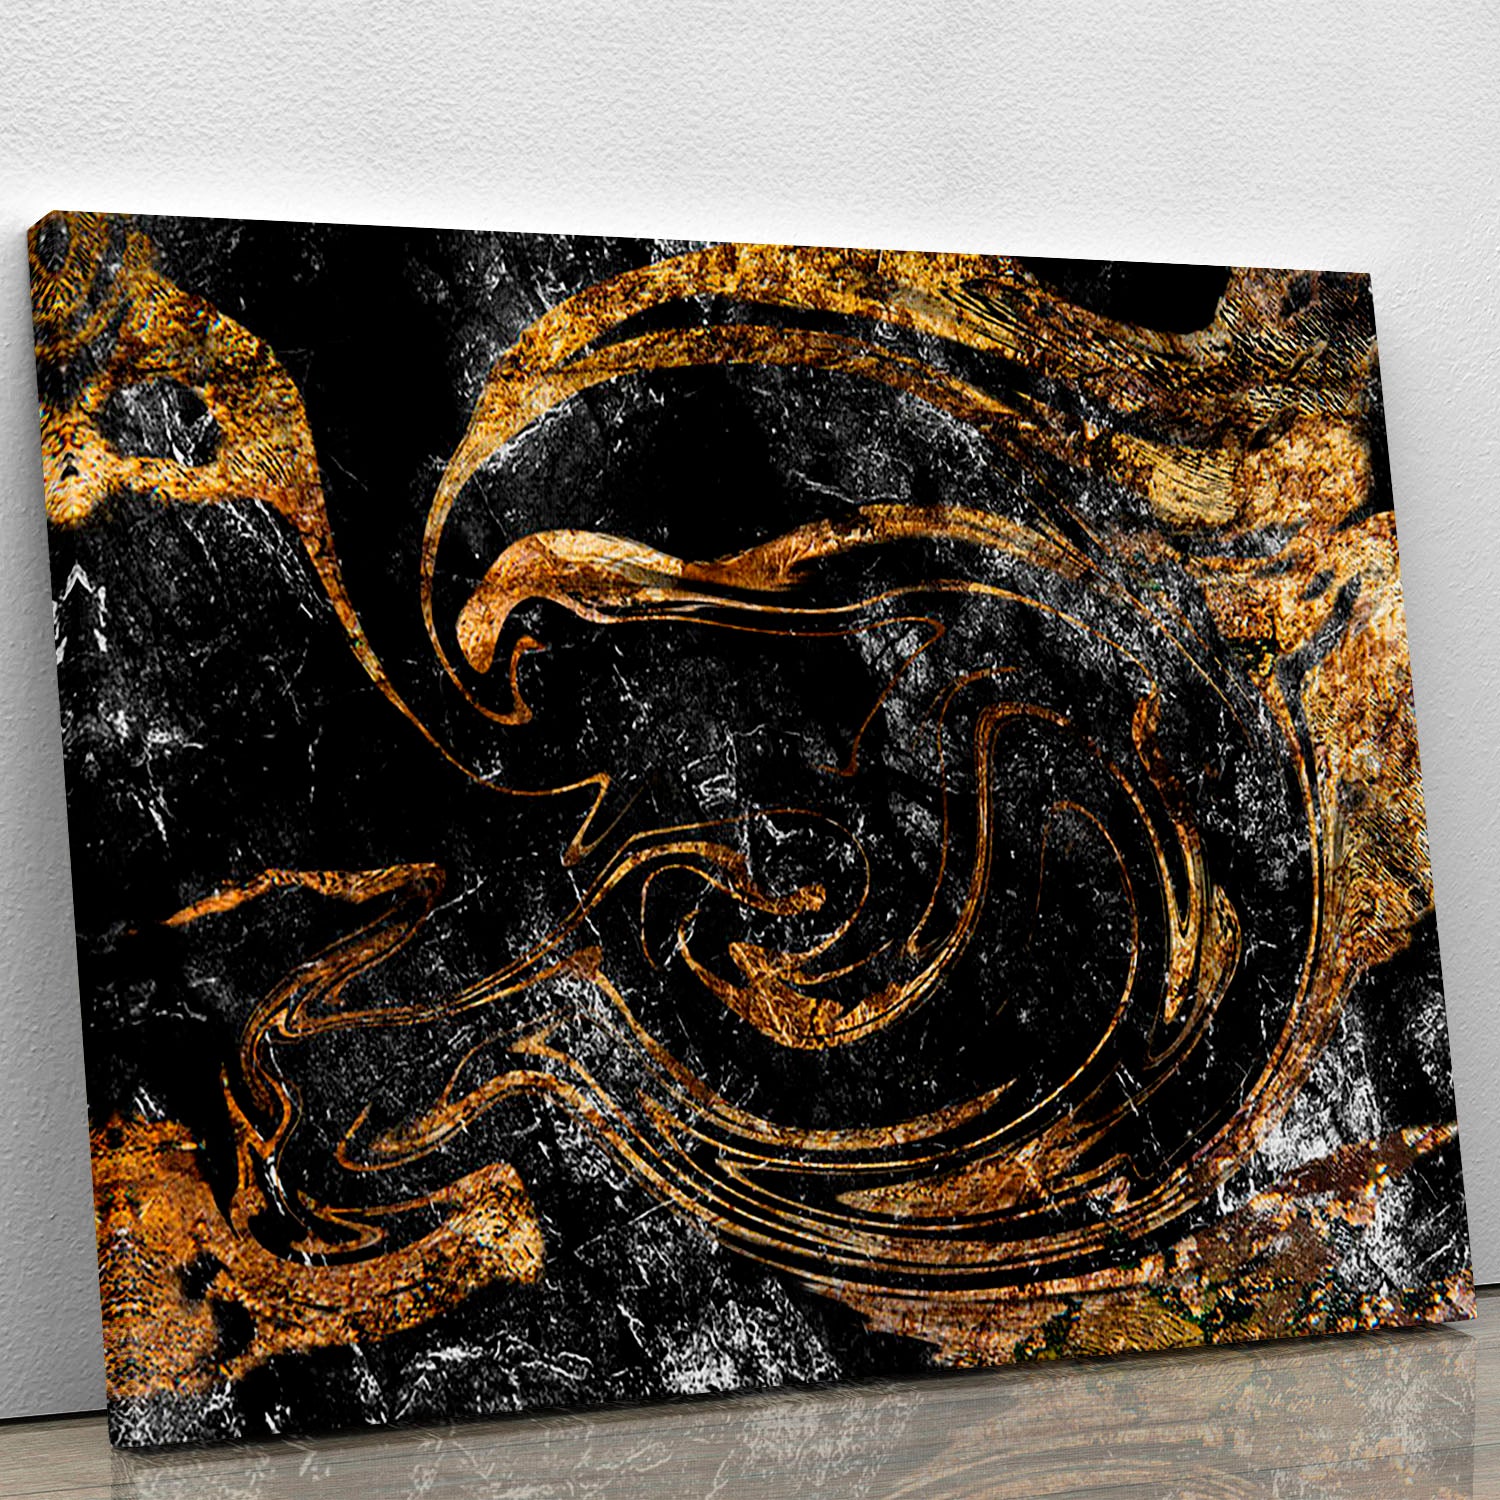 Black and Gold Swirled Marble Canvas Print or Poster - Canvas Art Rocks - 1